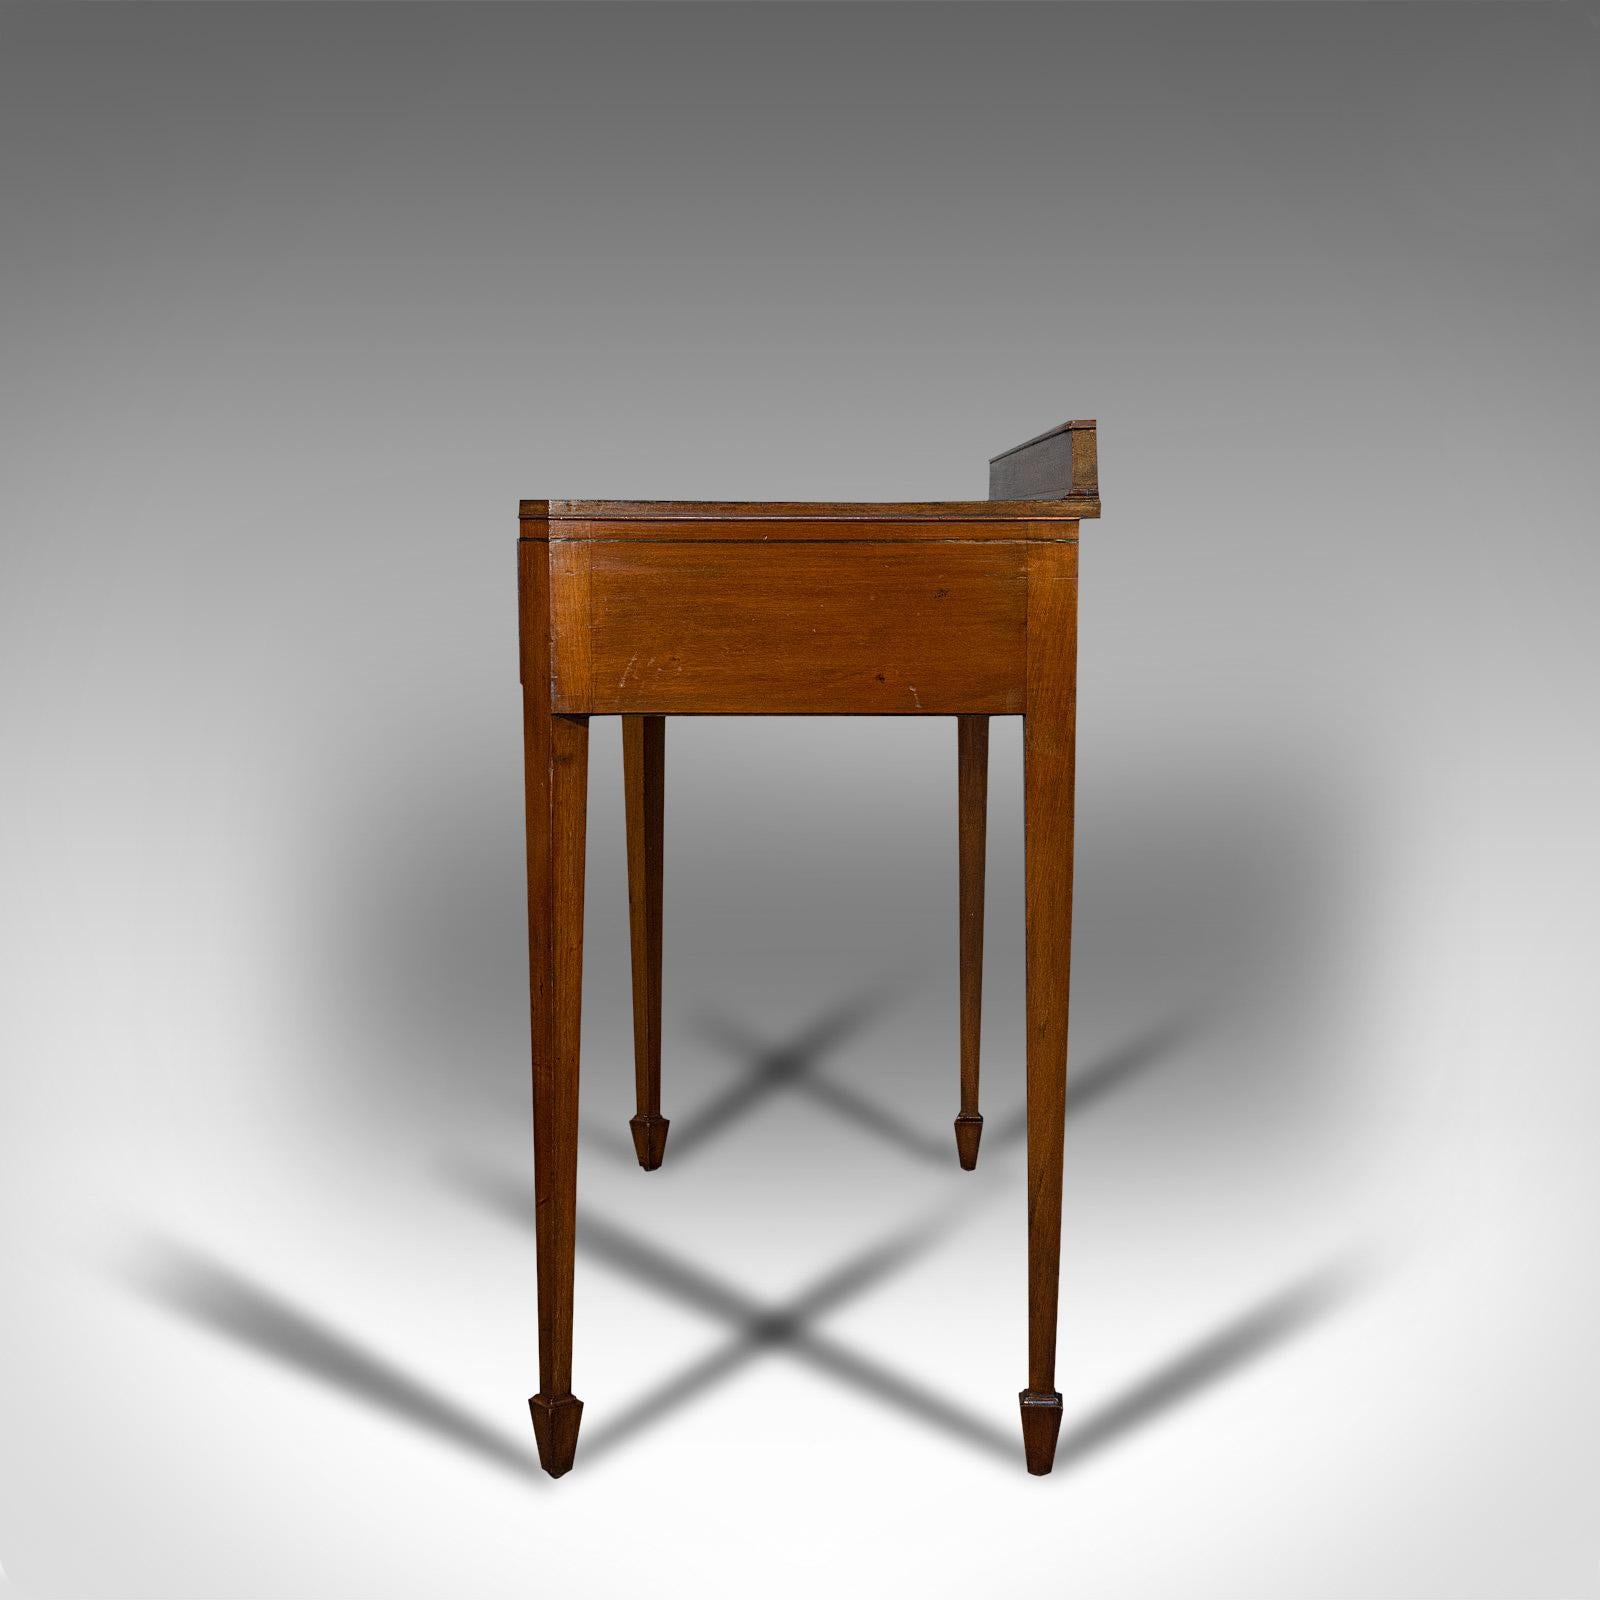 20th Century Antique Side Table, English, Mahogany, Buffet, Server, Hamptons, Edwardian, 1910 For Sale